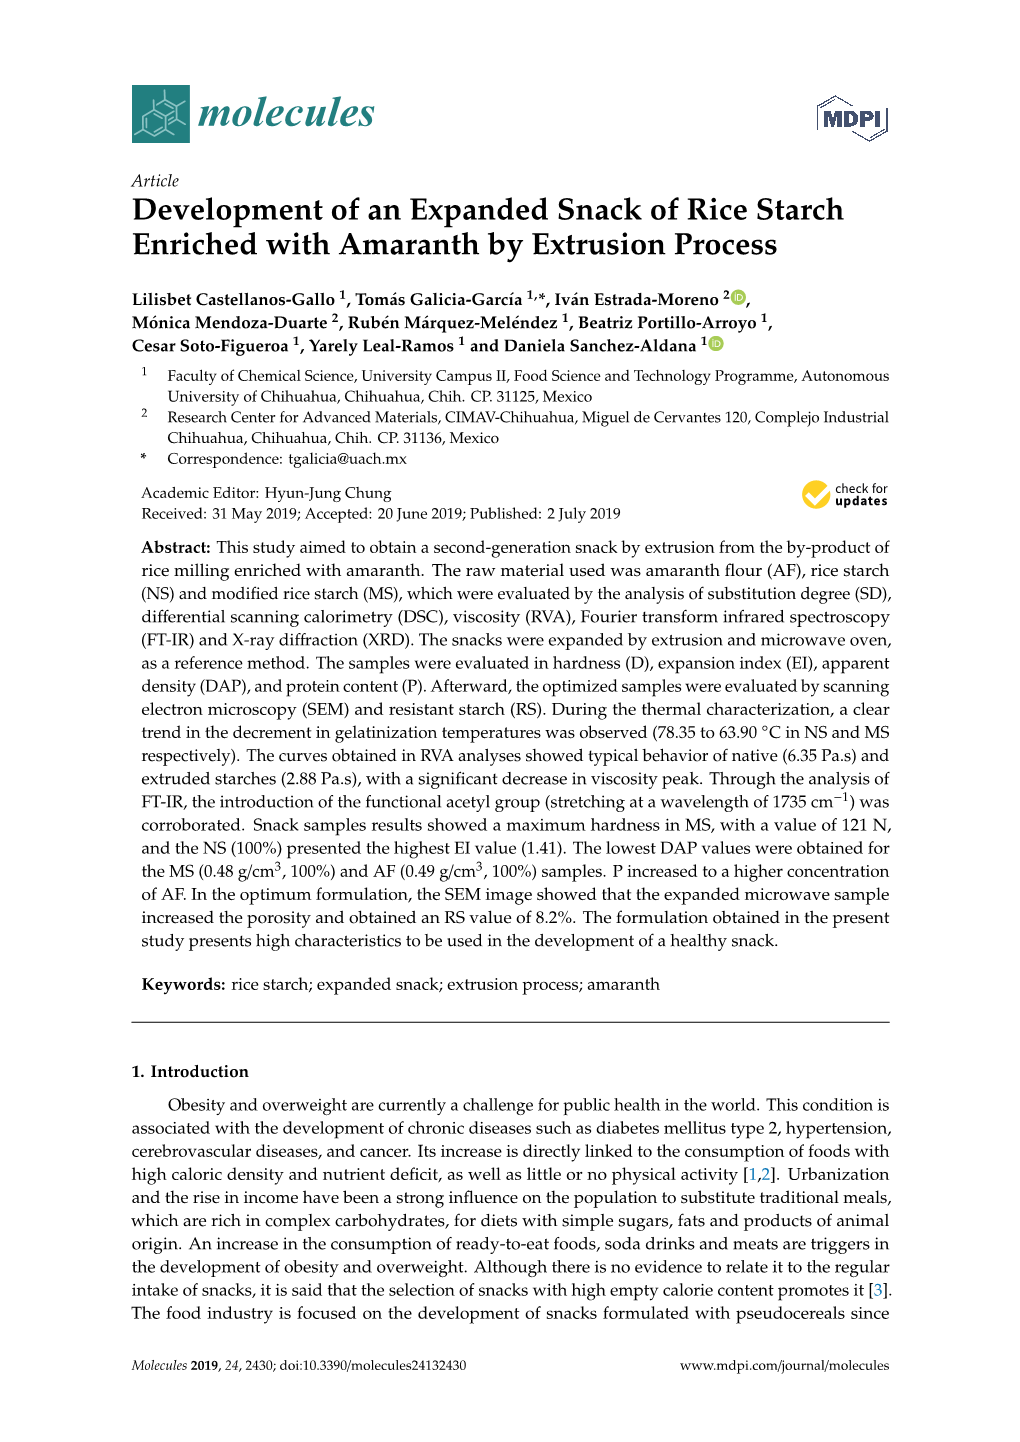 Development of an Expanded Snack of Rice Starch Enriched with Amaranth by Extrusion Process